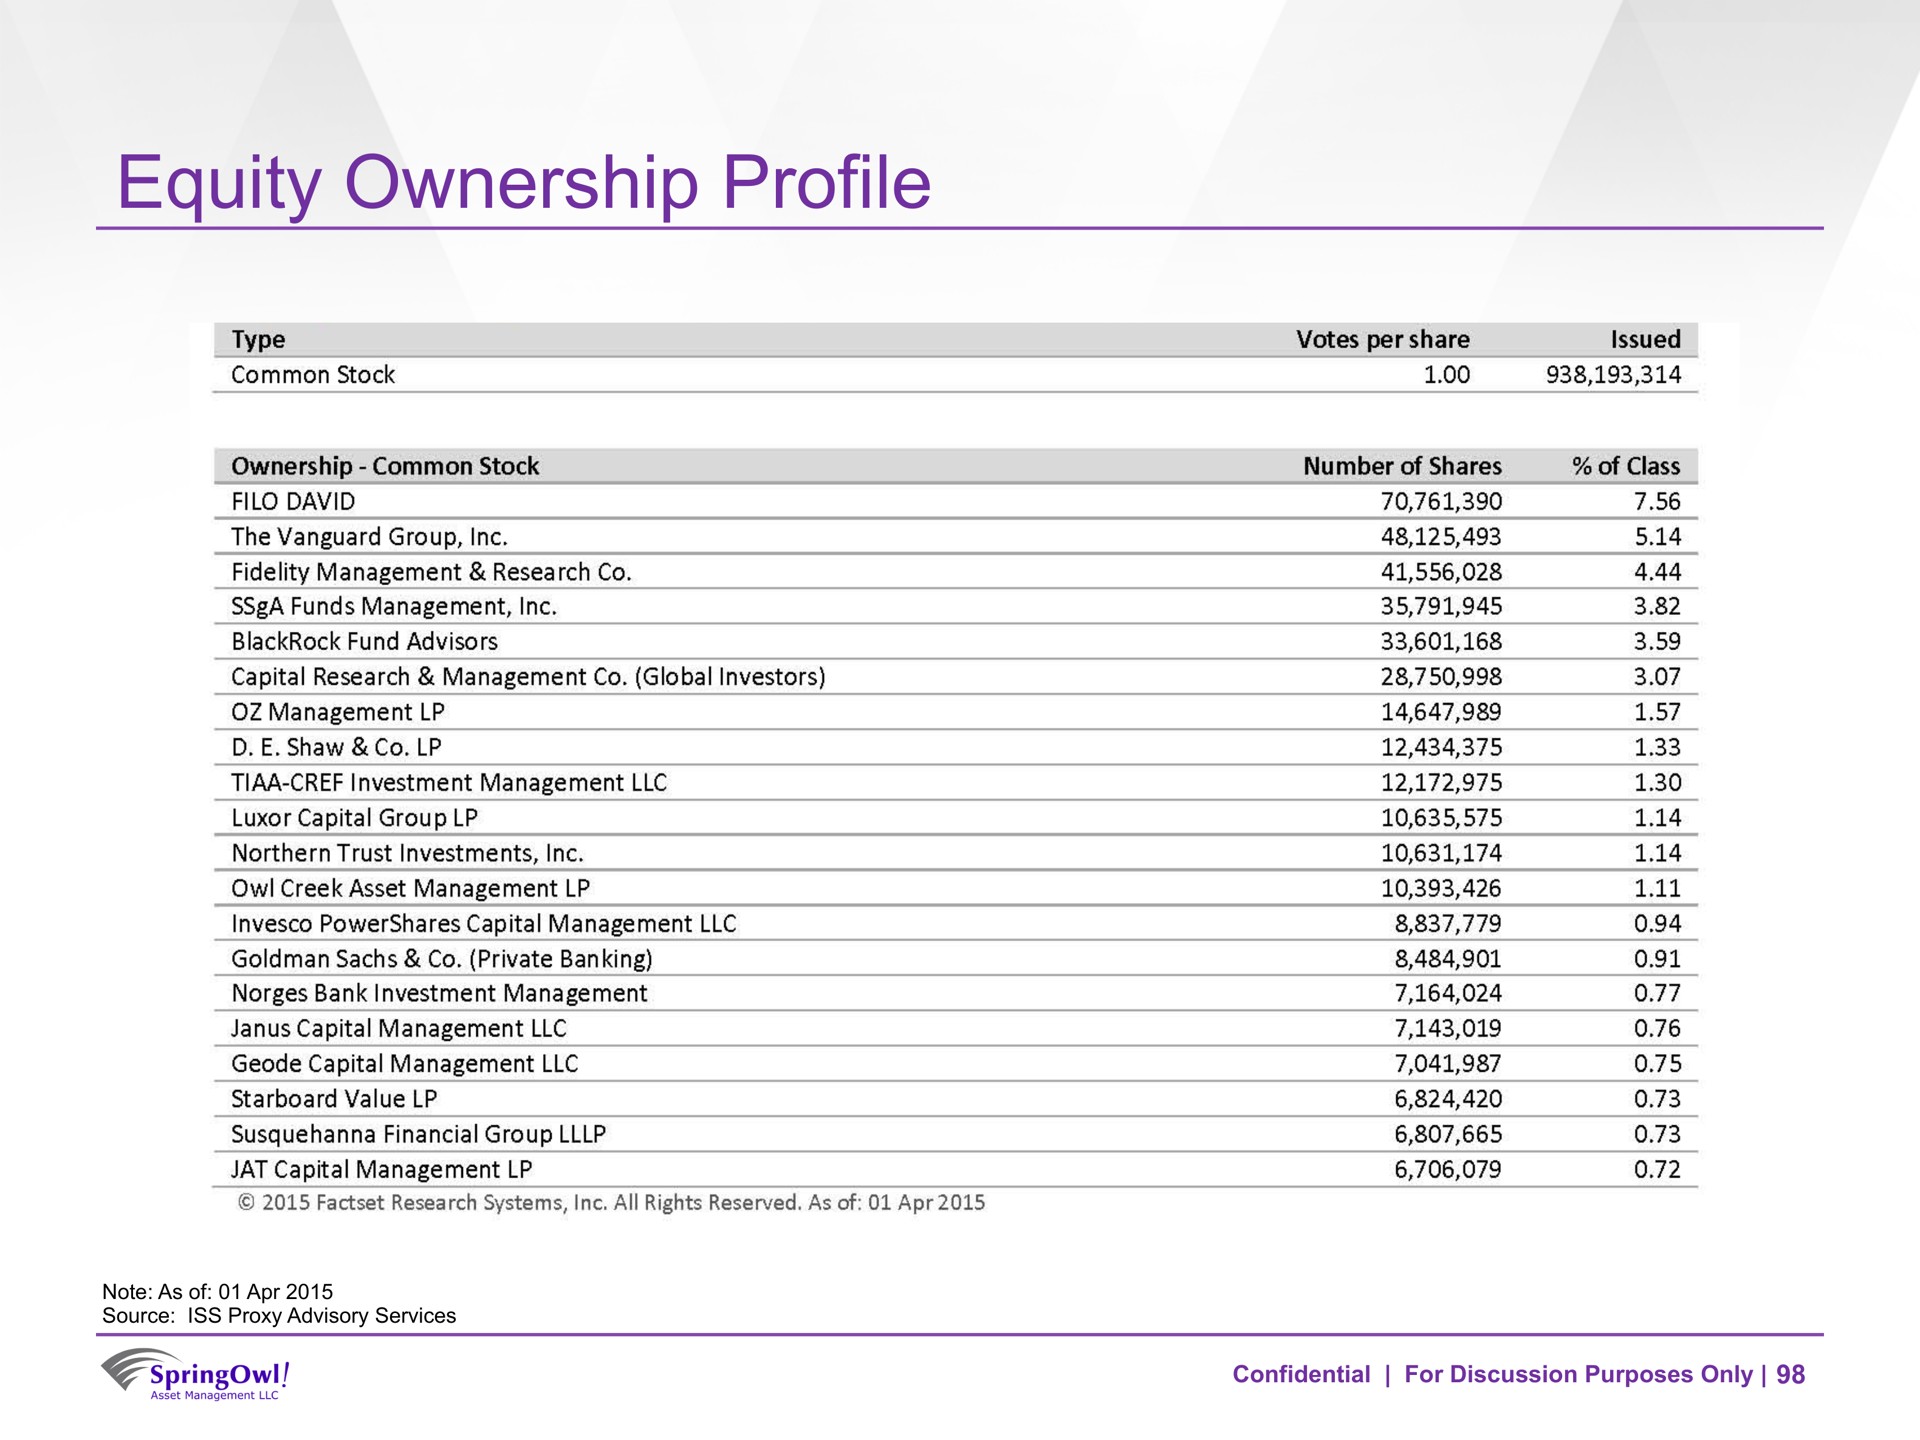 equity ownership profile | SpringOwl